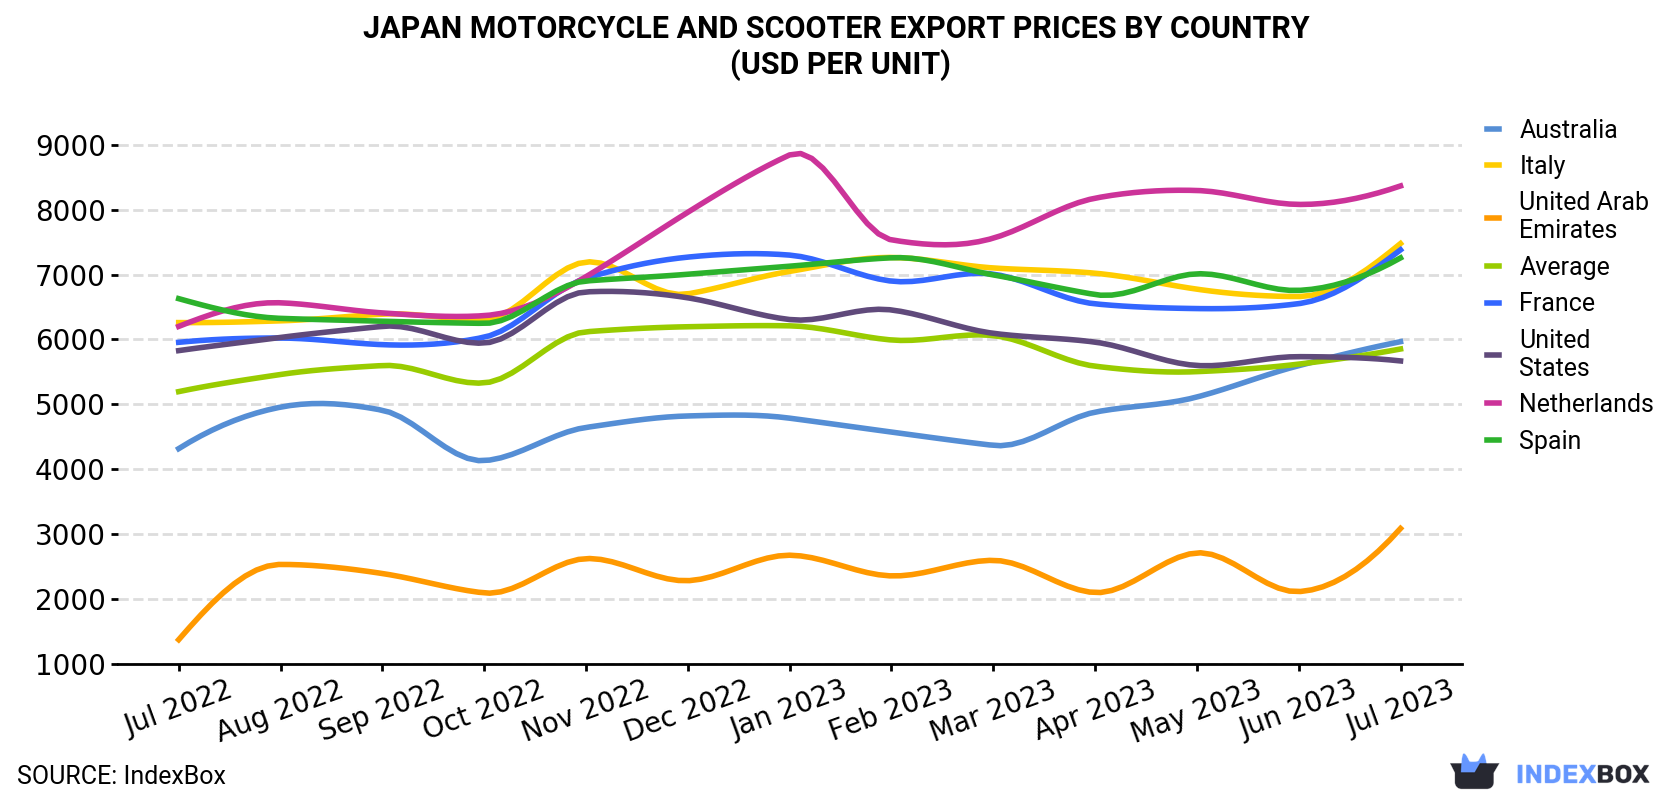 Japan Motorcycle And Scooter Export Prices By Country (USD Per Unit)